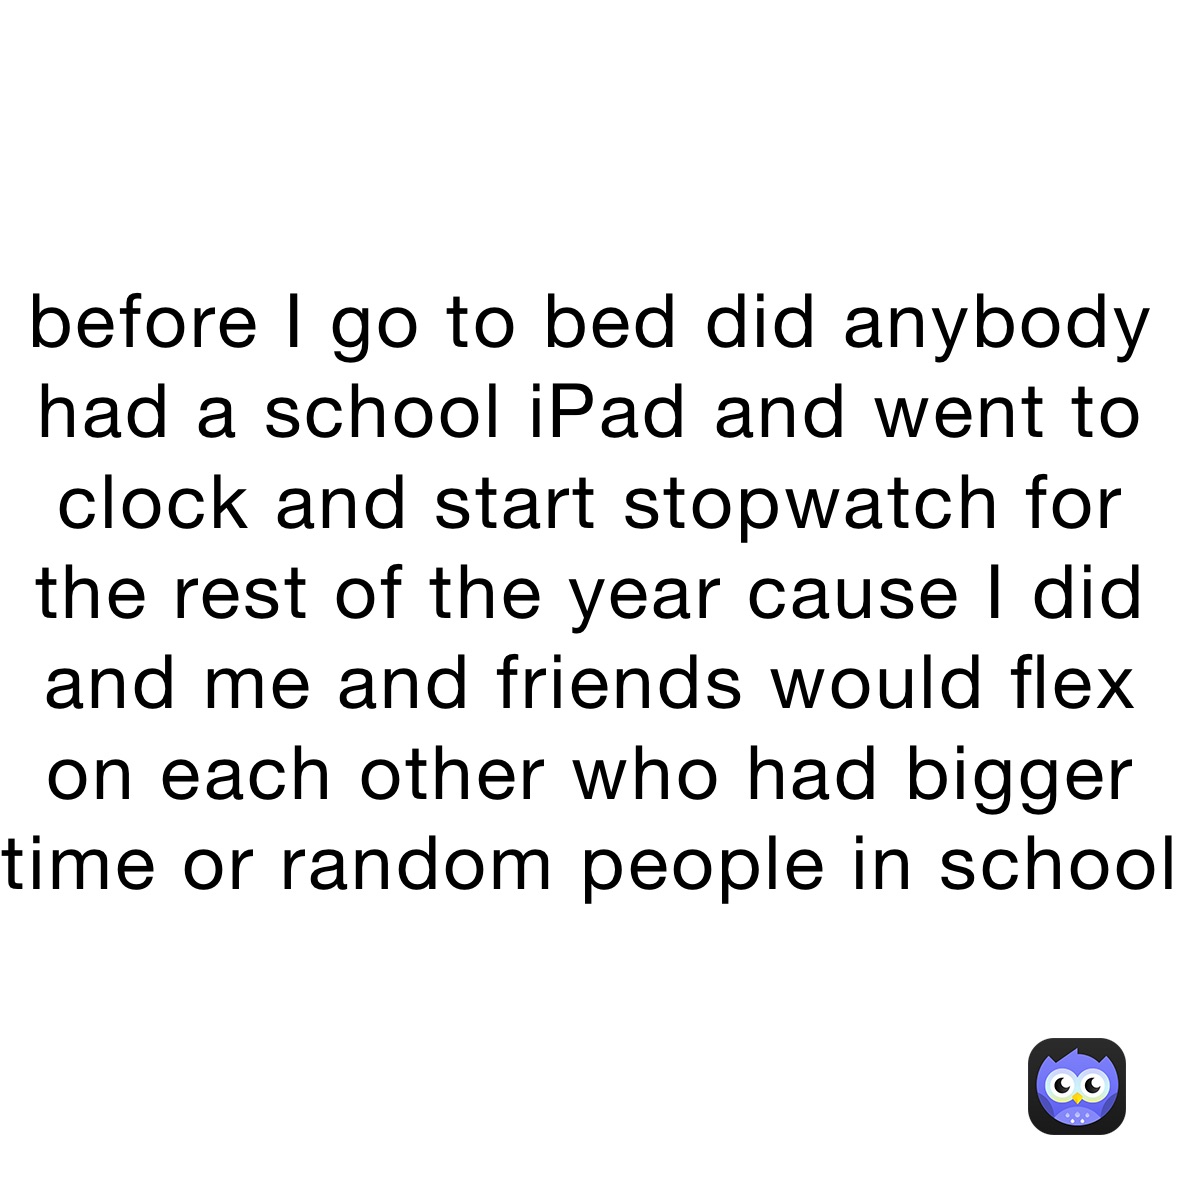 before I go to bed did anybody had a school iPad and went to clock and start stopwatch for the rest of the year cause I did and me and friends would flex on each other who had bigger time or random people in school